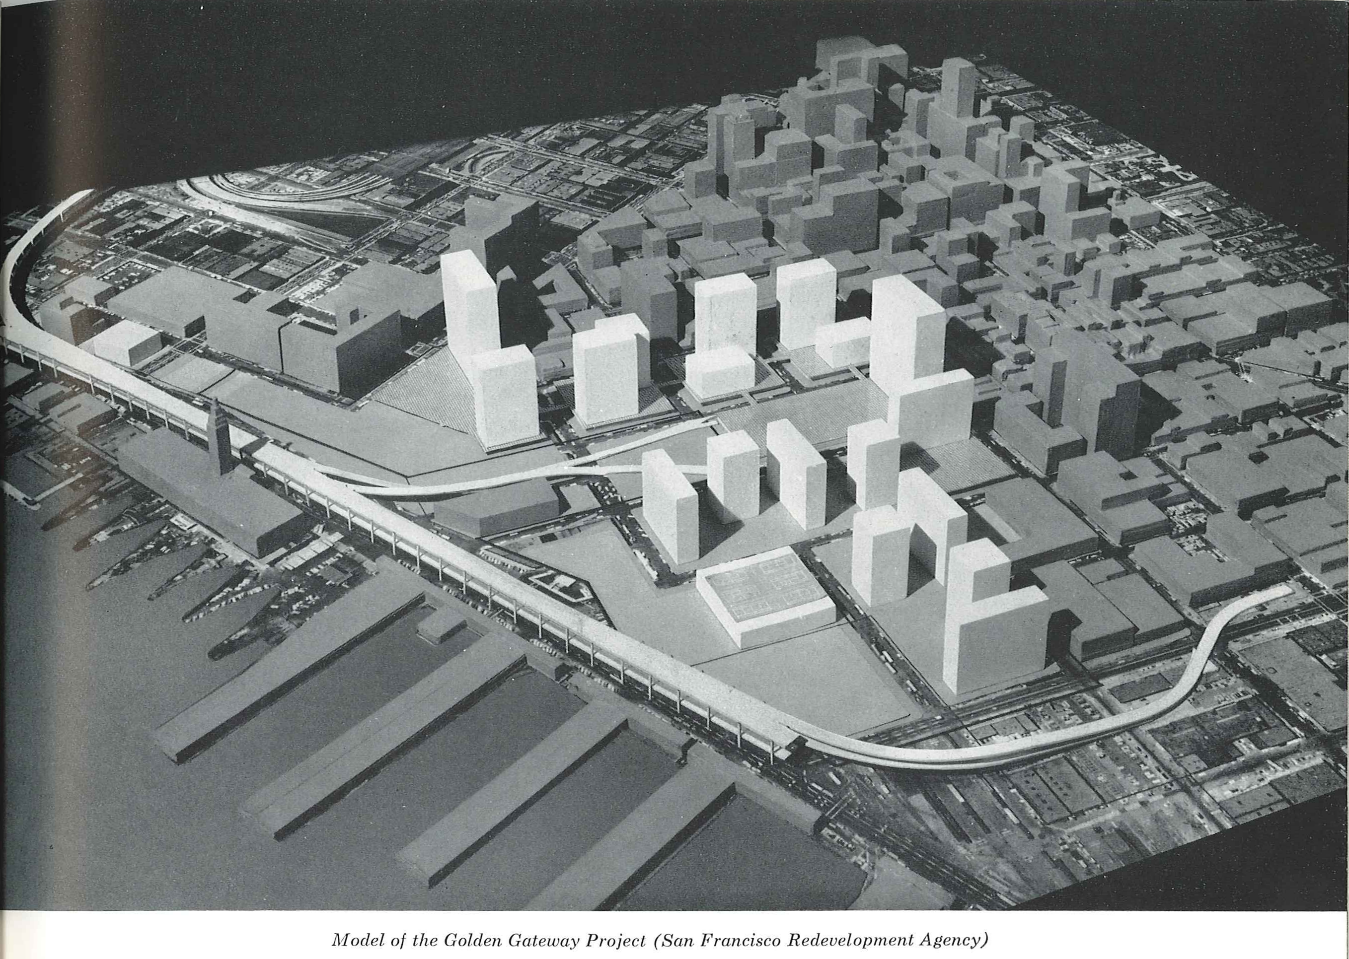 3D model of 1960 model of the Golden Gateway Project, see text above